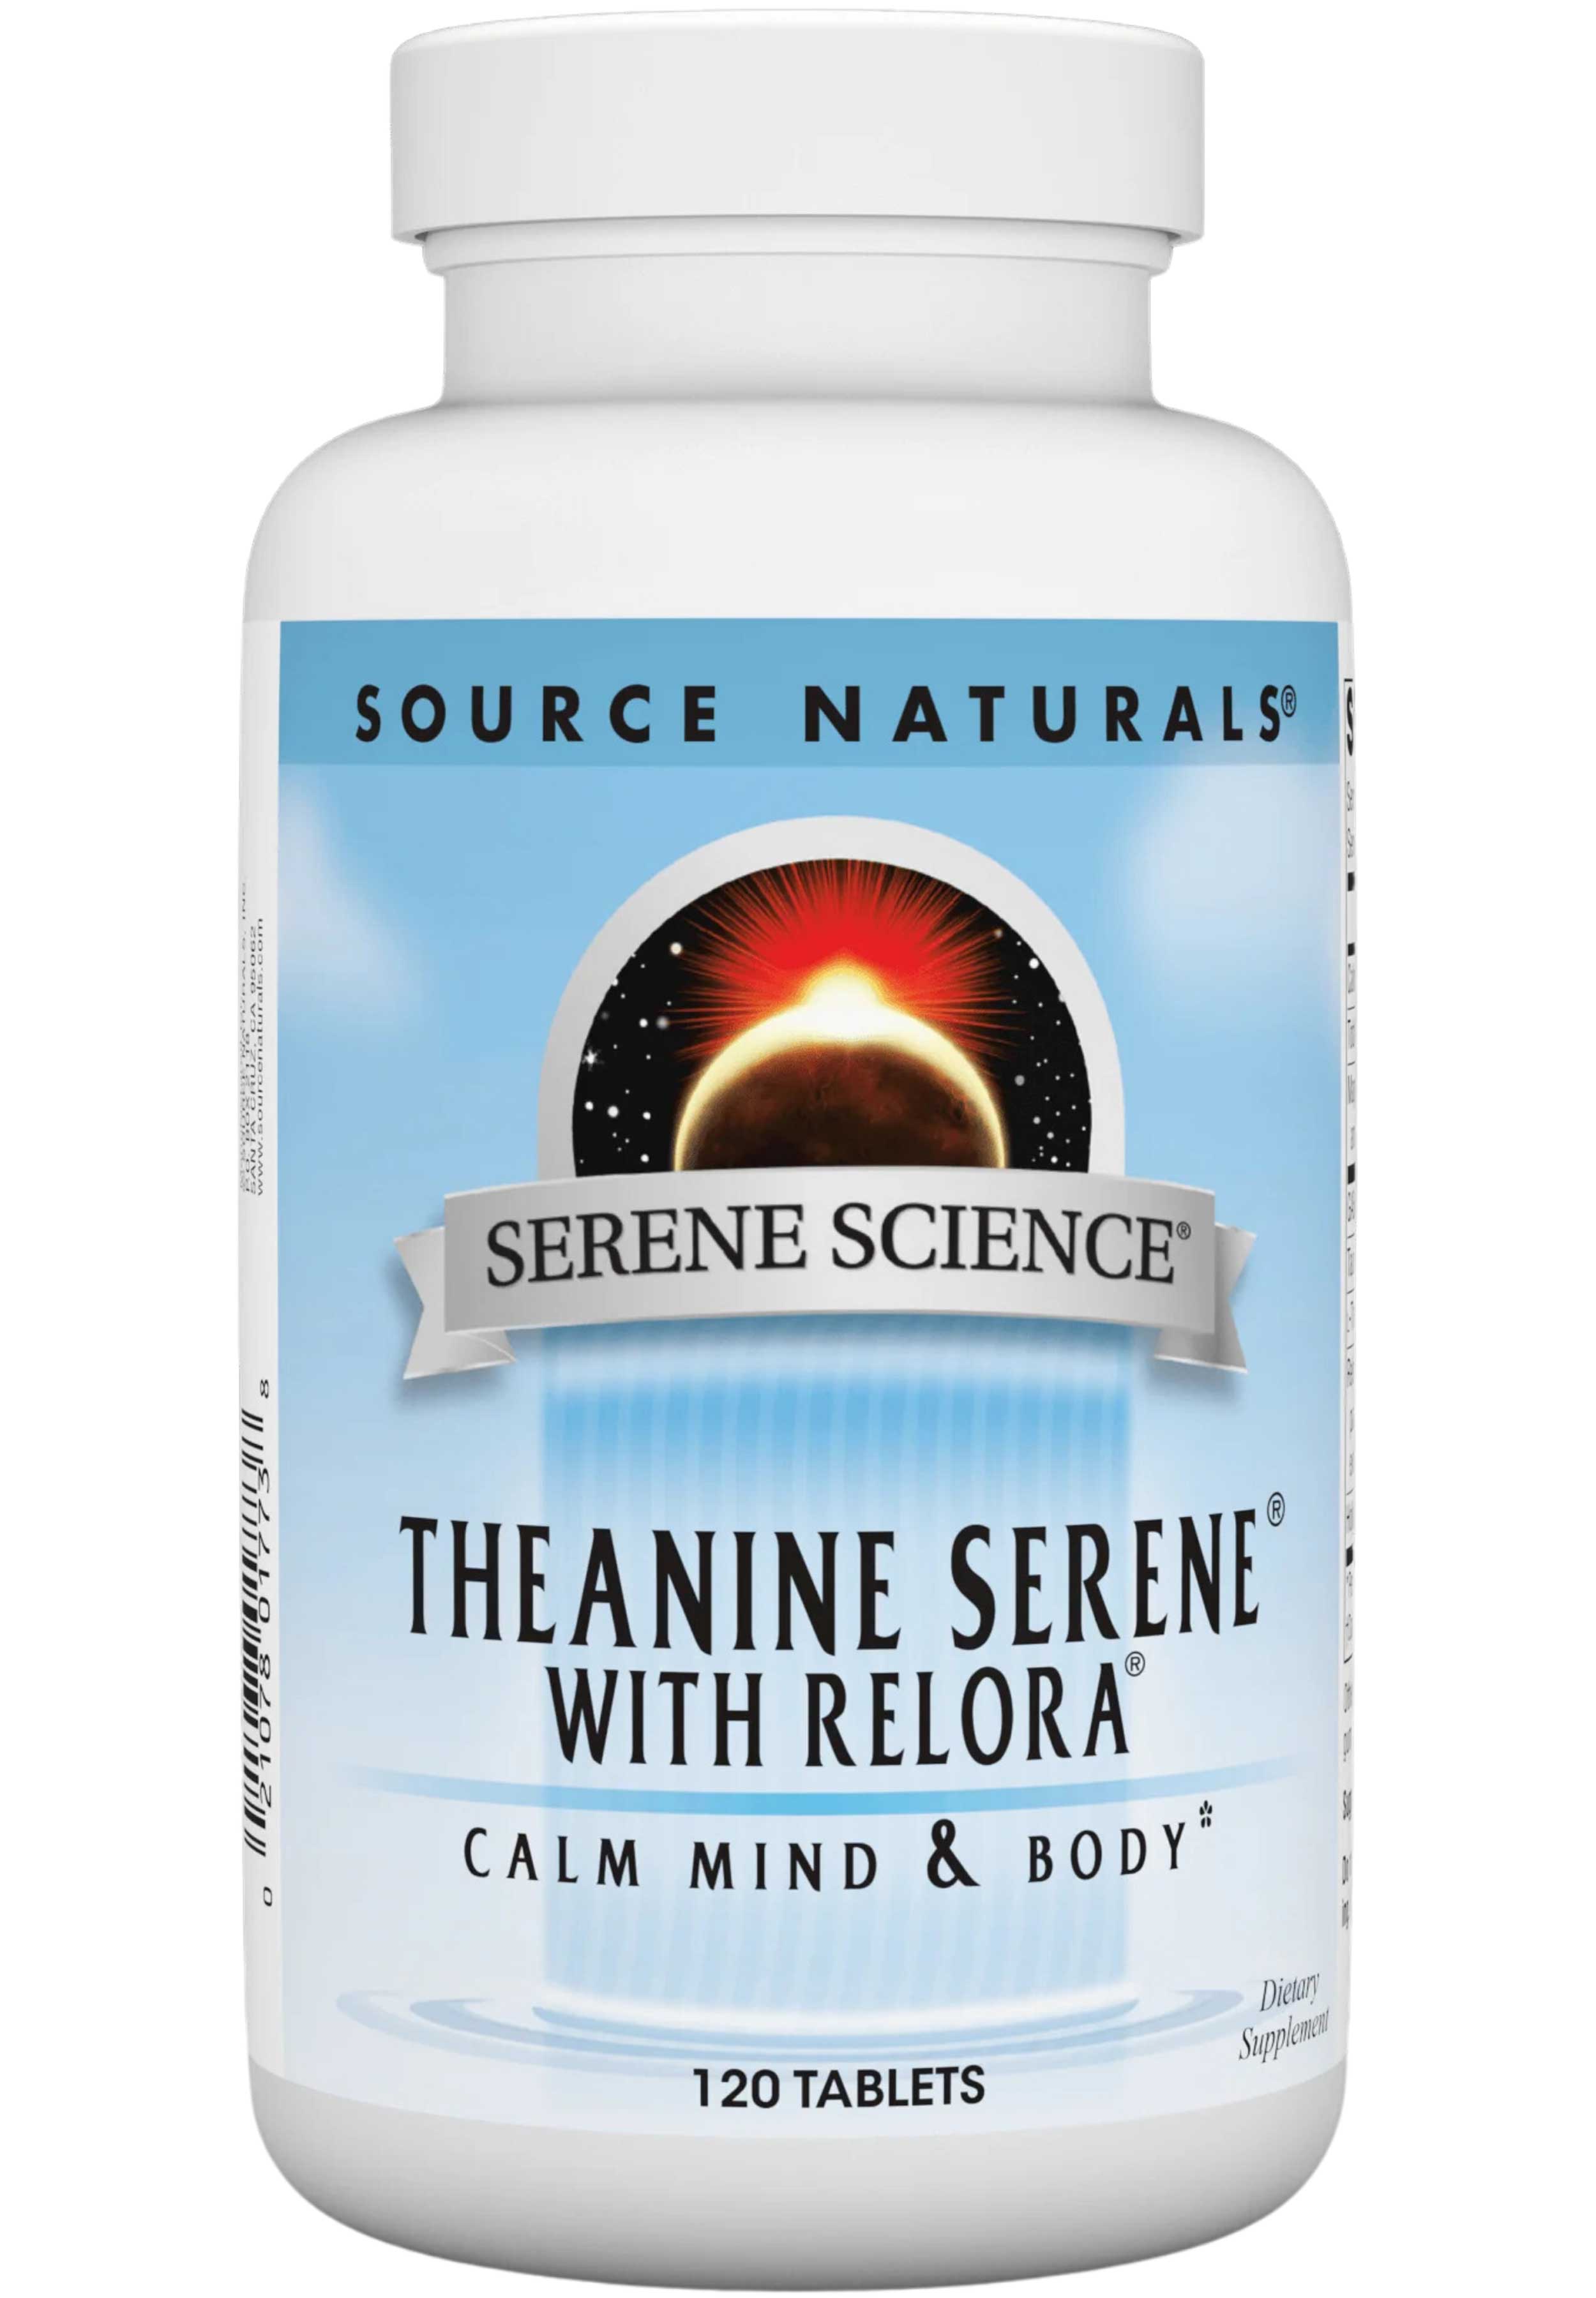 Source Naturals Theanine Serene with Relora